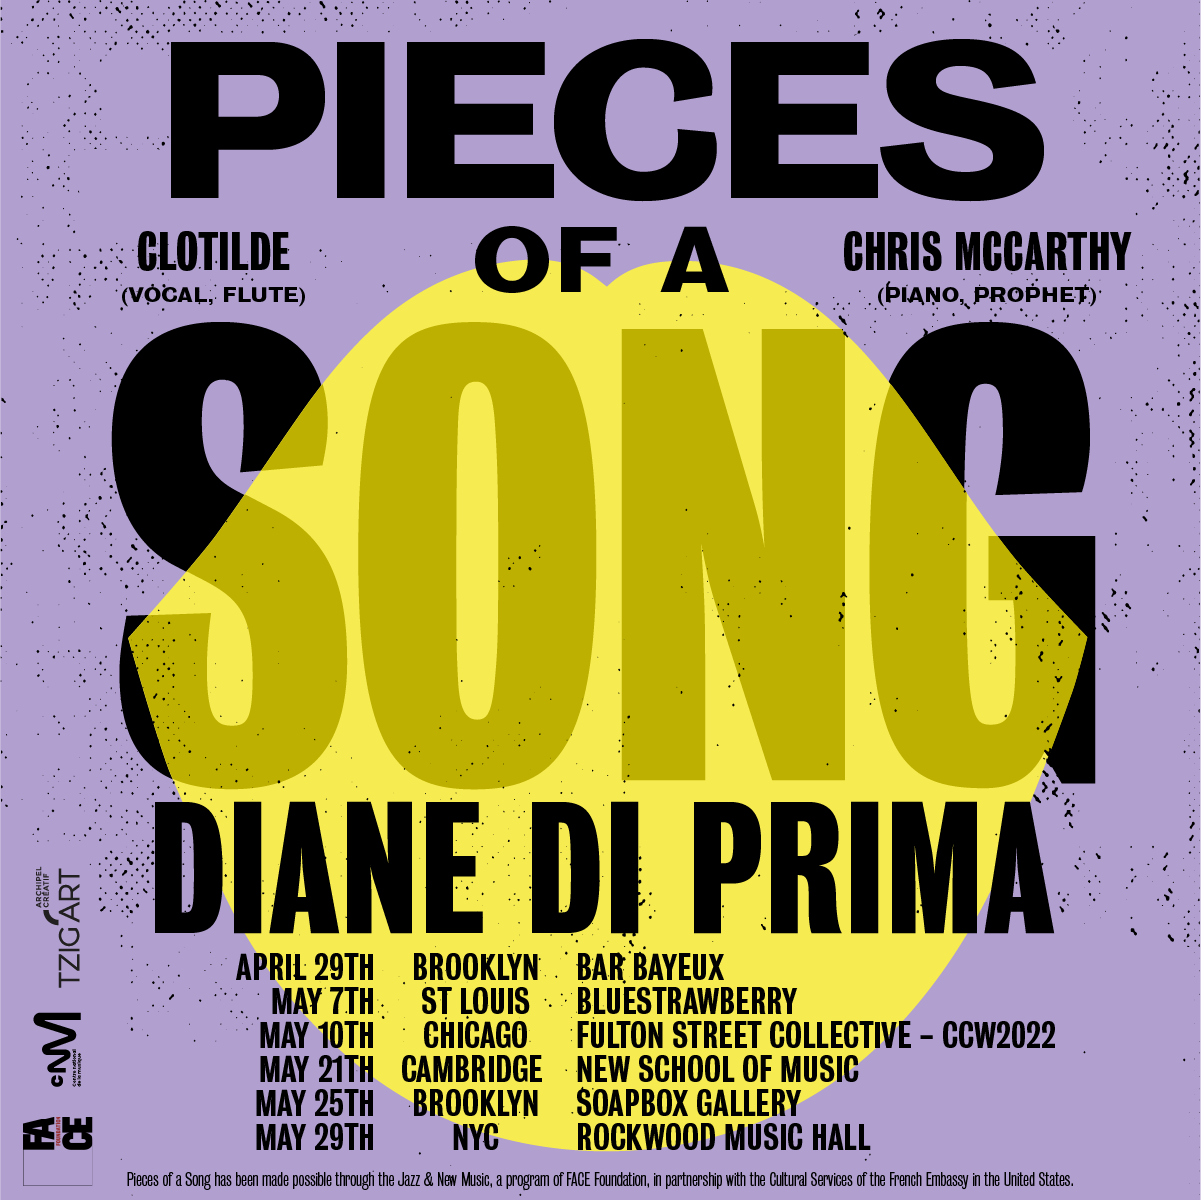 Pieces of a song by Chris McCarthy and Clotilde